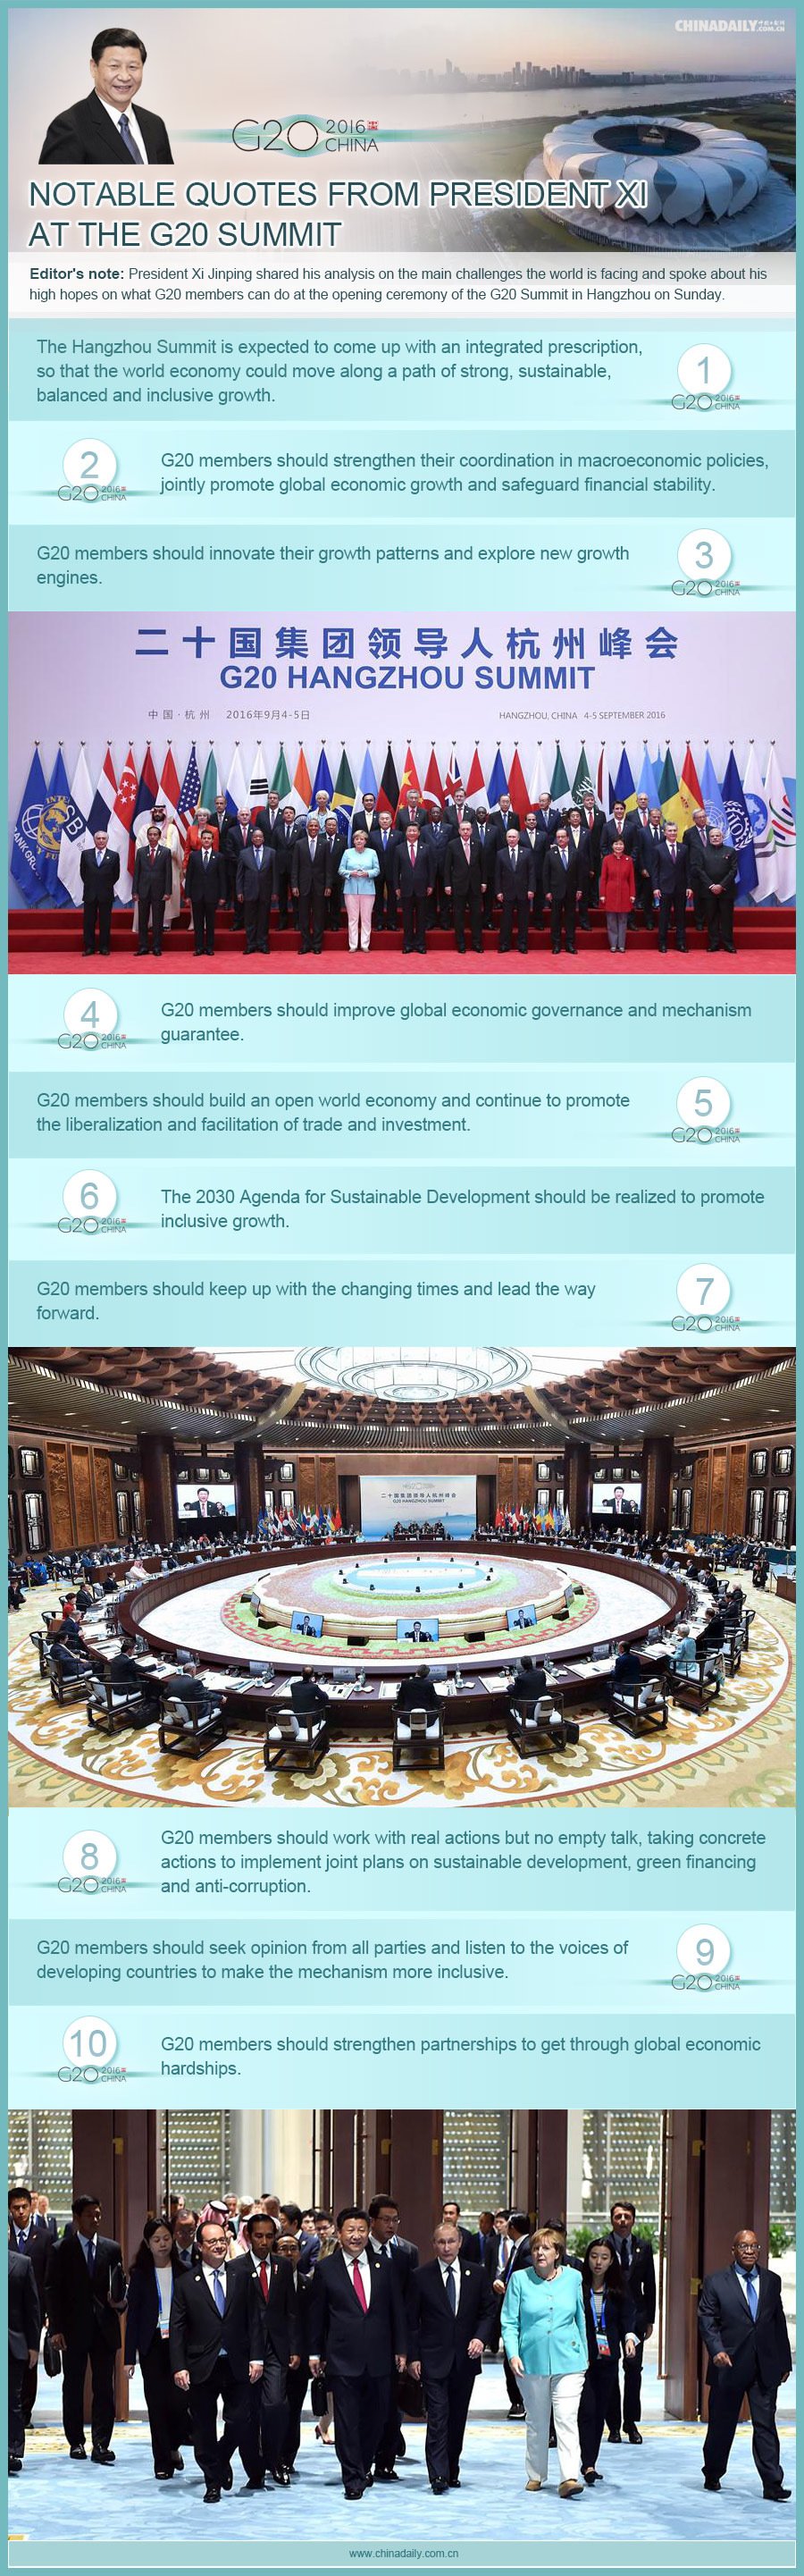 Notable quotes from President Xi at G20 Summit